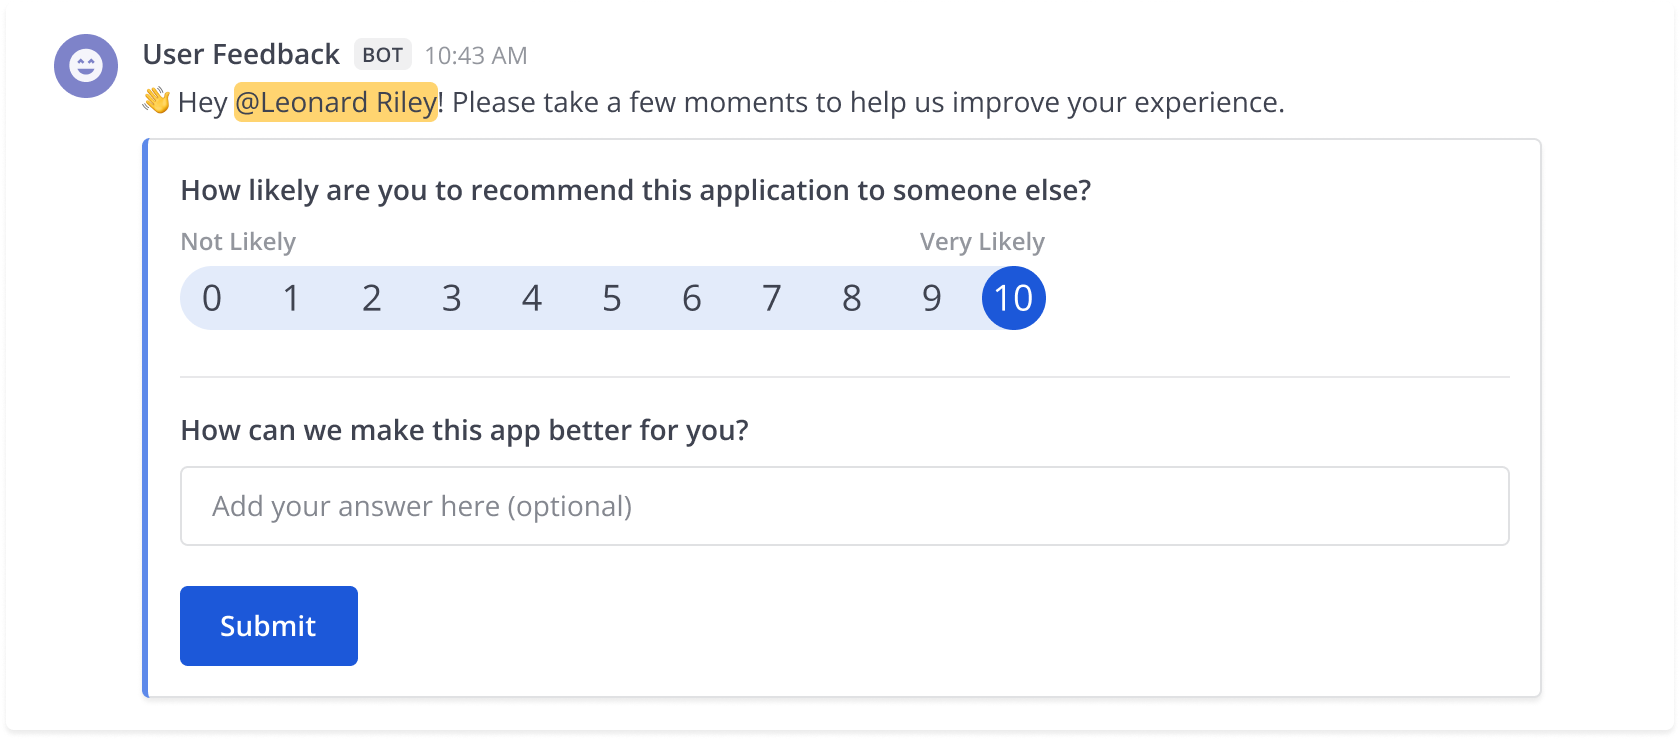 An example of the user survey provided to users.